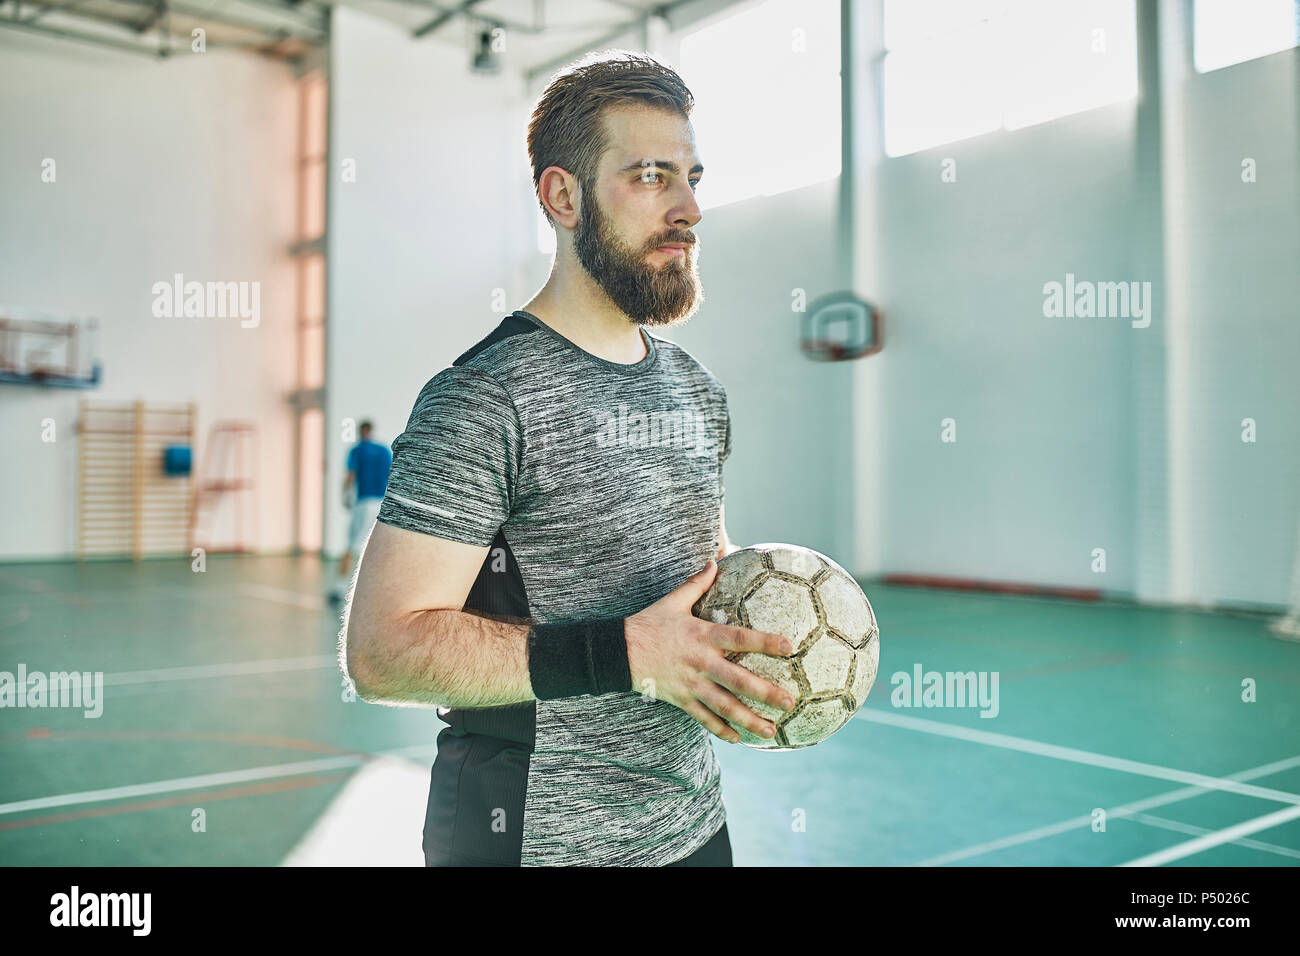 Portrait of indoor soccer player holding the ball Stock Photo